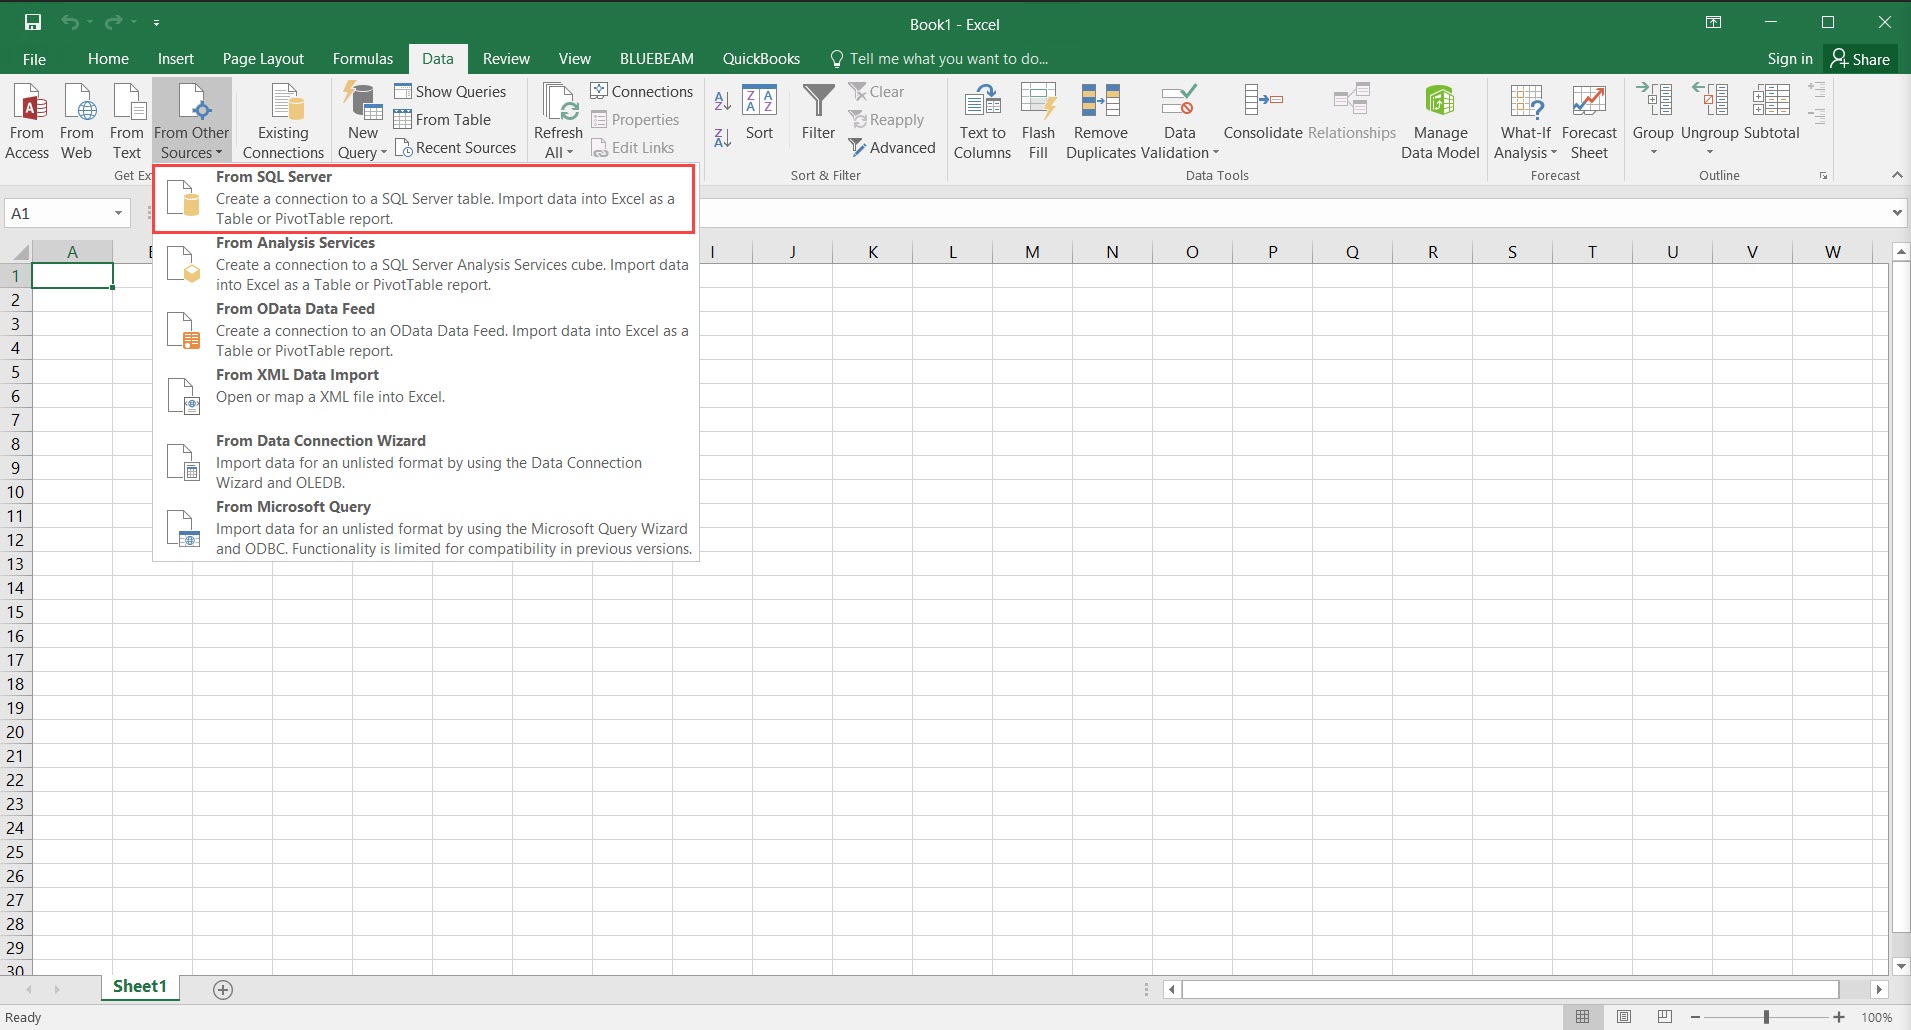 Excel Workbook; shows the From Other Sources drop-down menu and the location of From SQL Server.